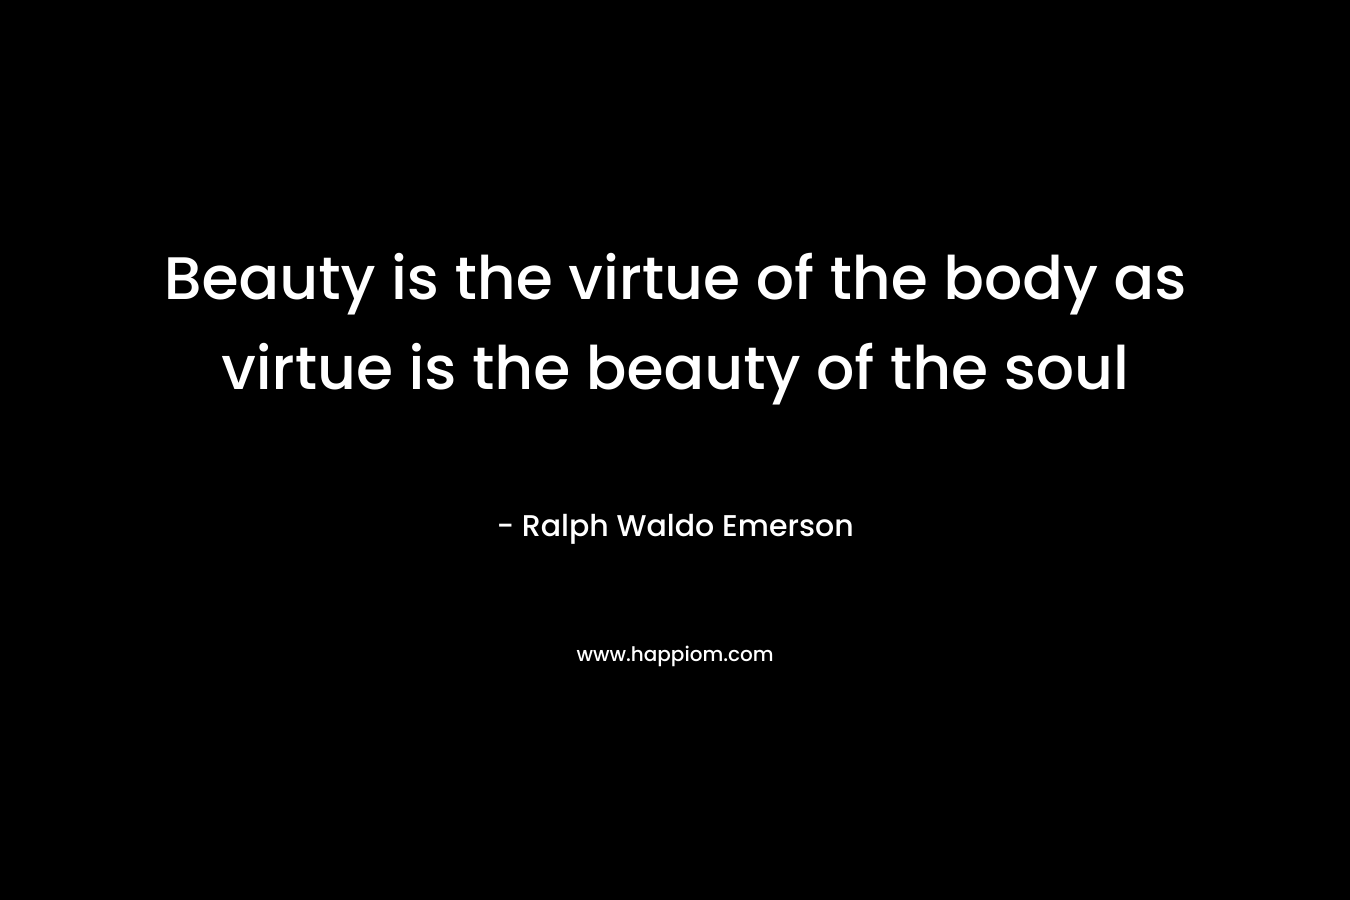 Beauty is the virtue of the body as virtue is the beauty of the soul